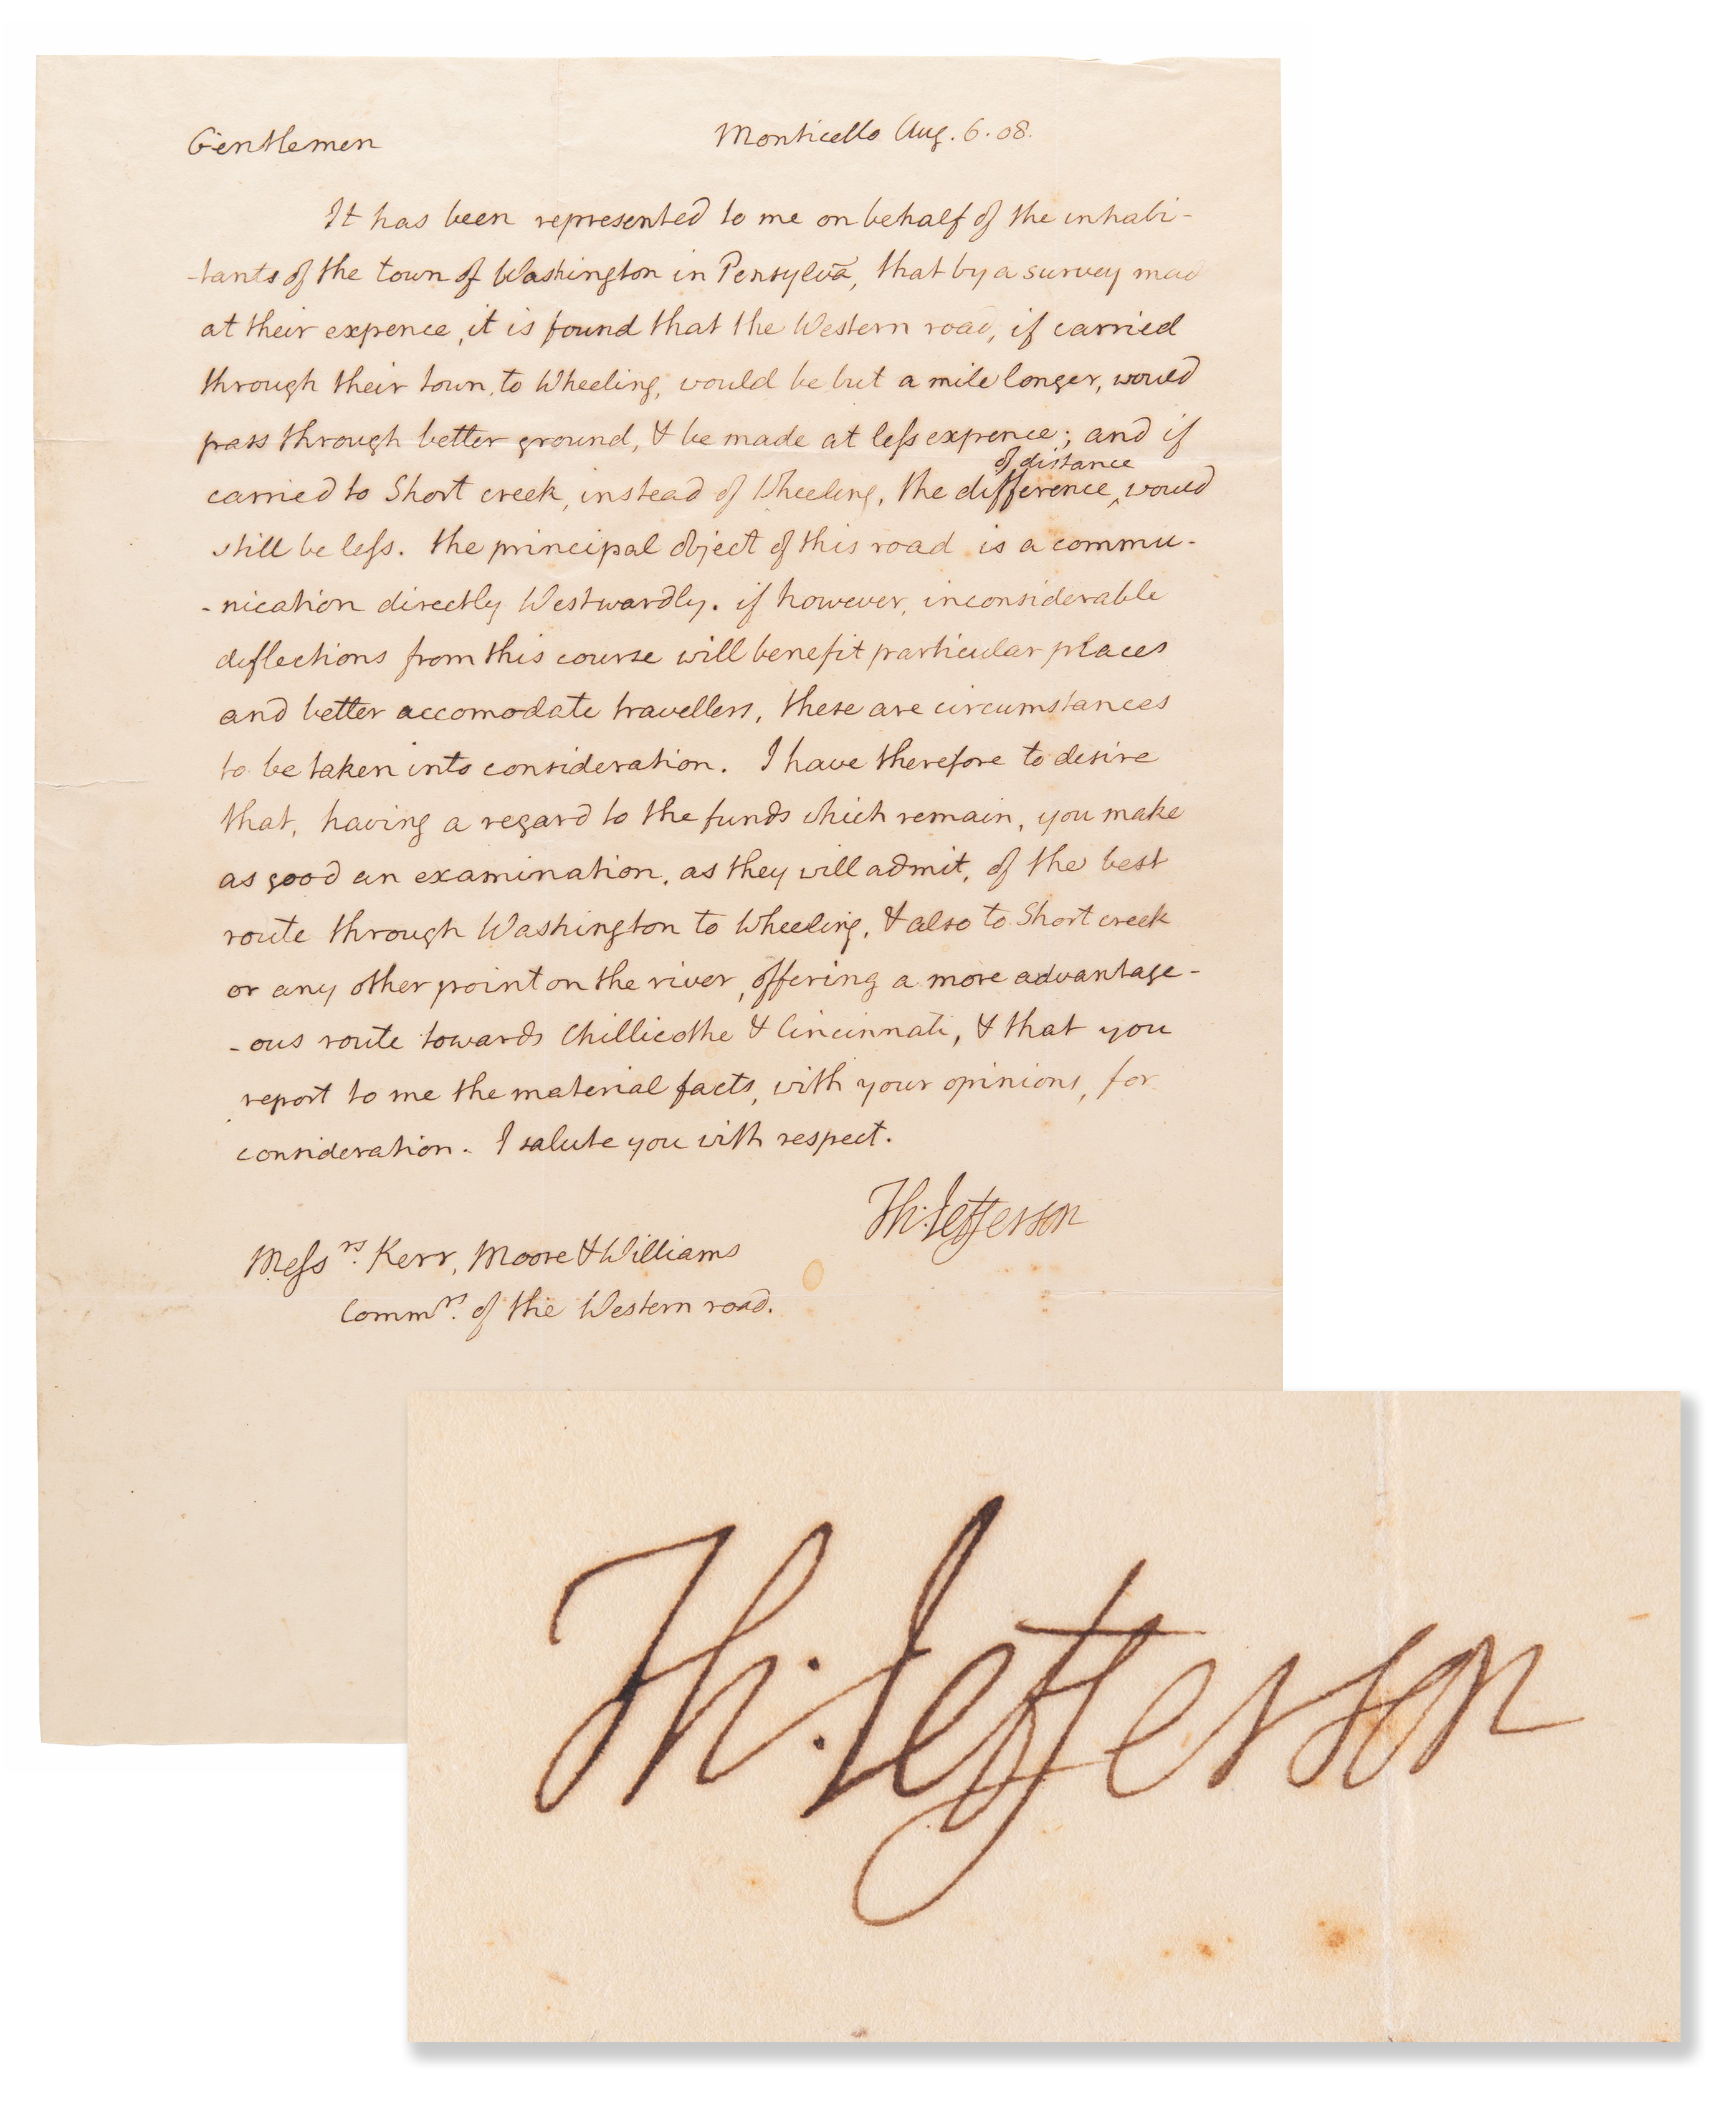 Lot #4002 Thomas Jefferson Autograph Letter Signed as President on "the Western road" - The First Federally Funded Highway - Image 1